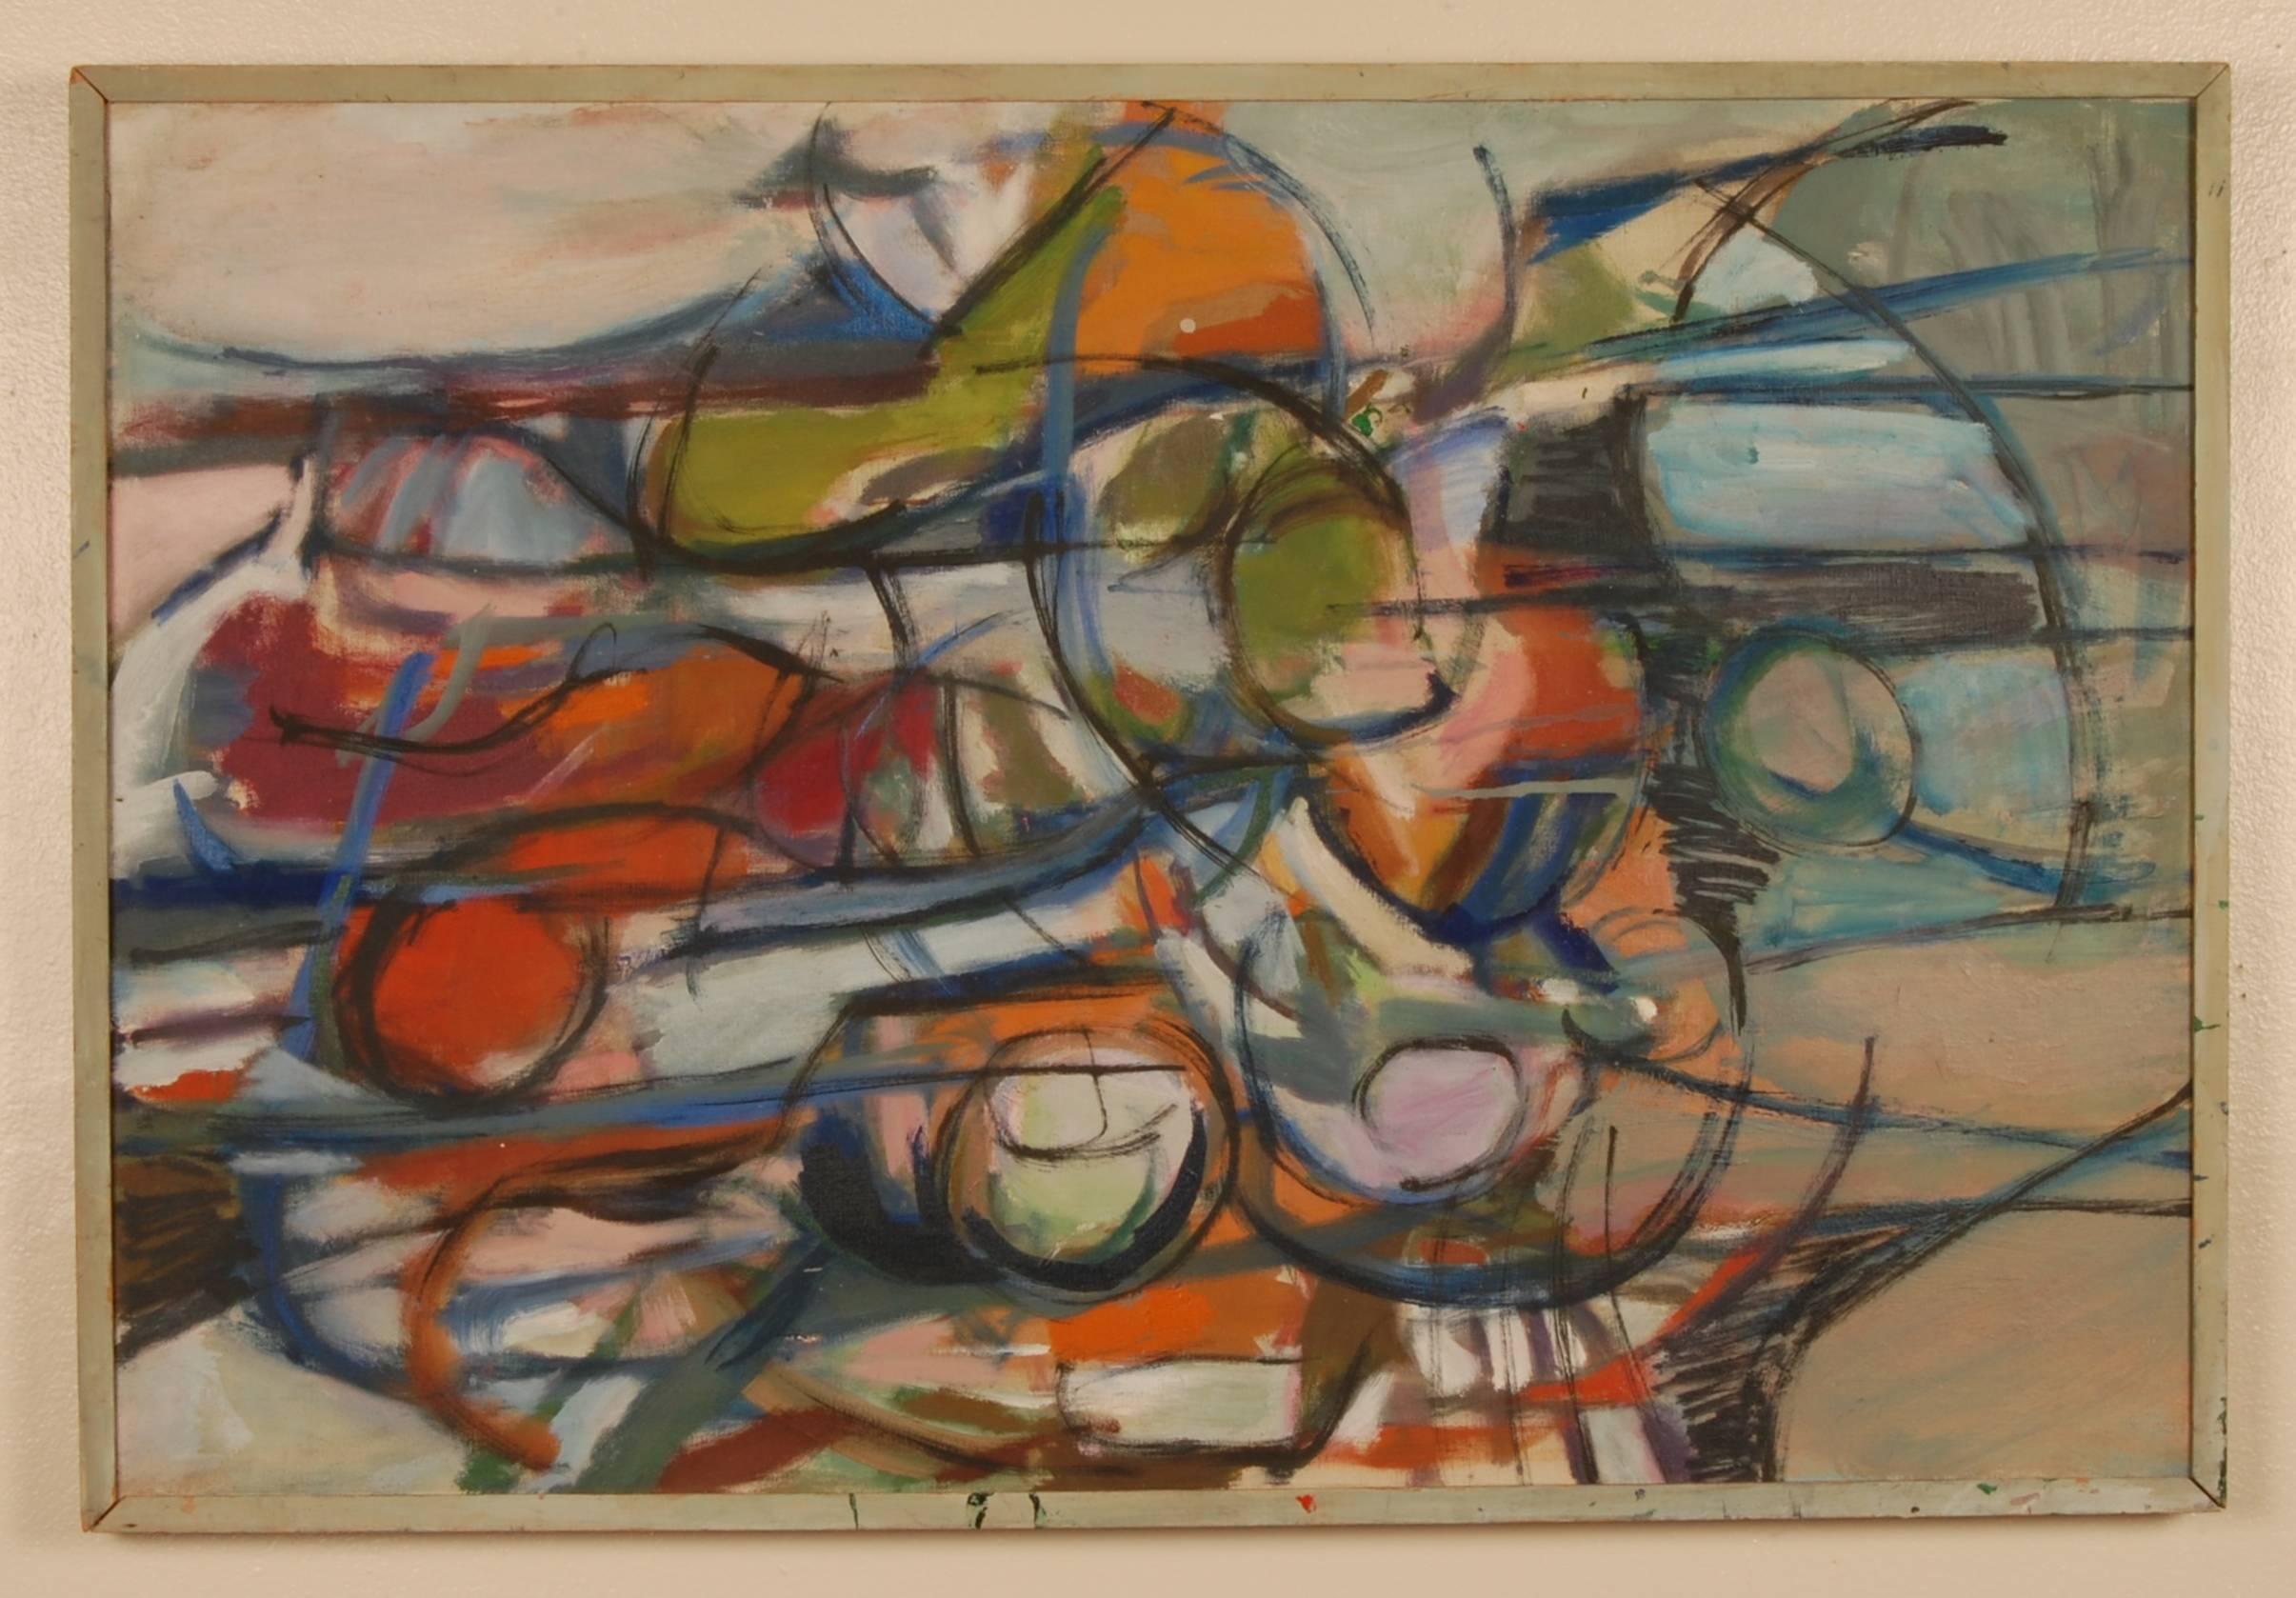 Oil on canvas oil painting by Bay Area artist Irene Needle Halpern (1929 - ). Abstract forms with the colors of burnt orange, deep red, green, grey and hues of blue oil paint. The grey colored frame is by the hand of the artist which was a common